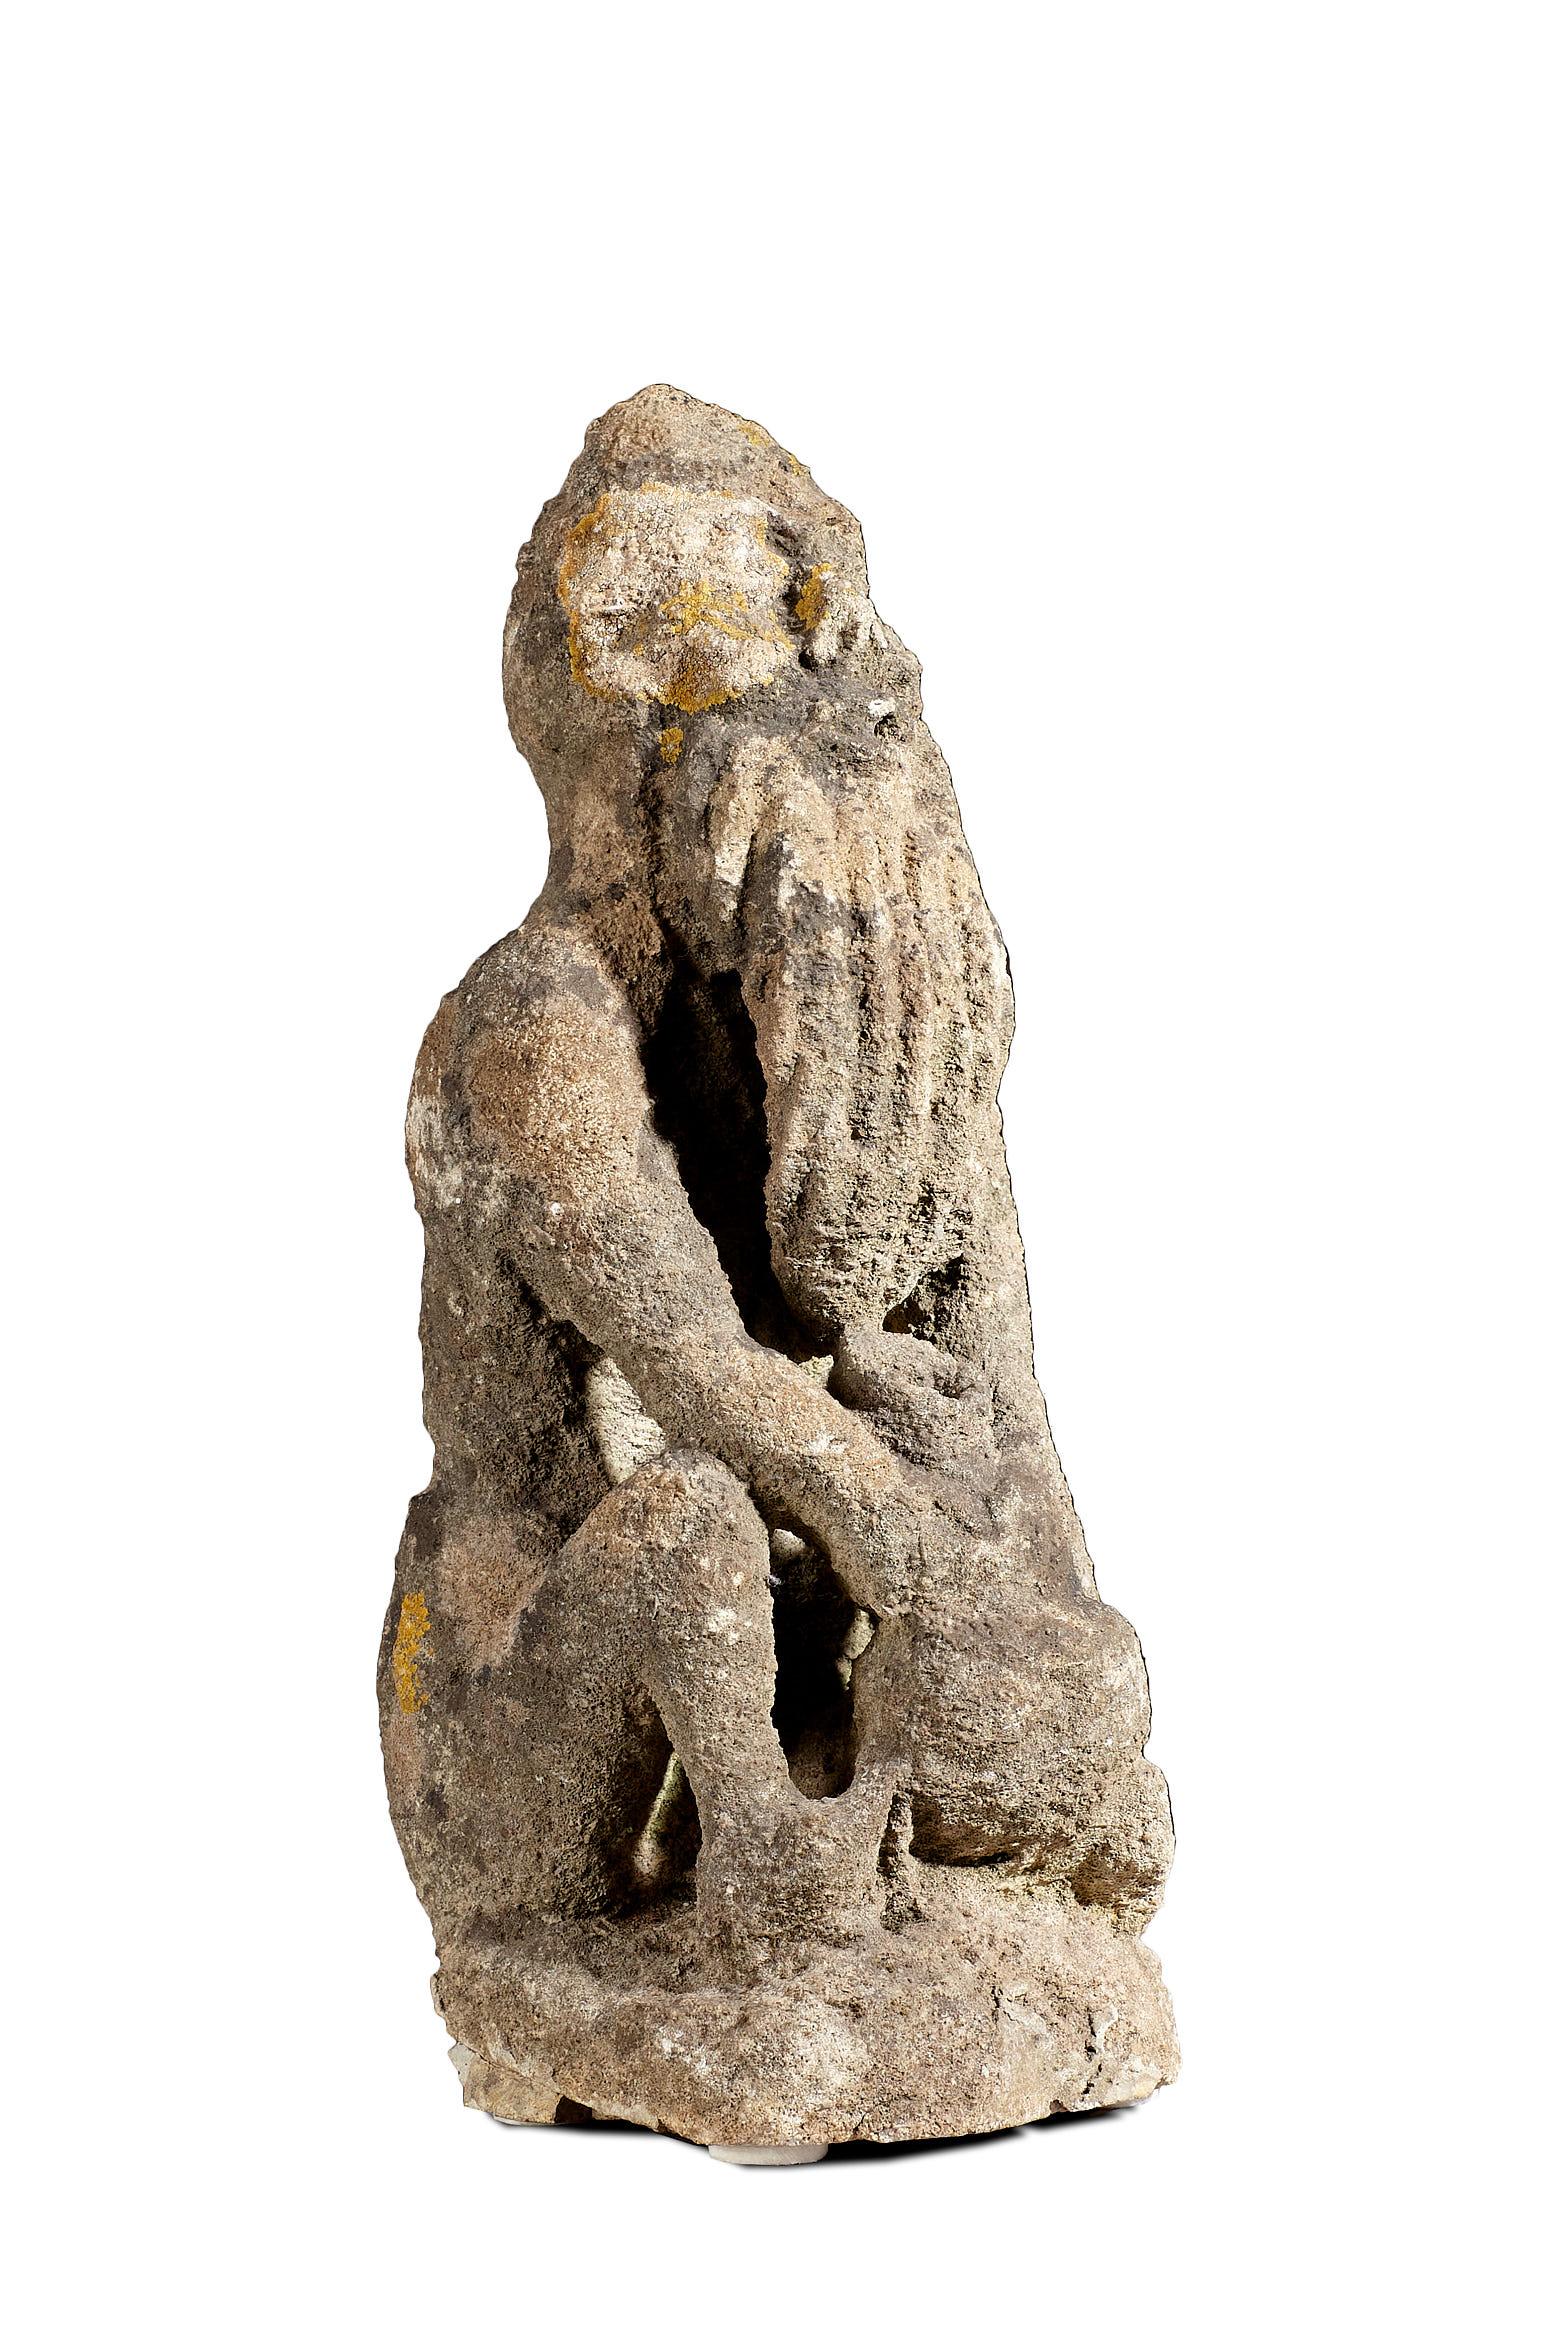 Medieval / Gothic limestone drinking man, English, circa 1400-1450.

The Oolitic limestone figure of a seated man with flowing beard holding a drinking pot between his knees, suggestive of him having sampled liberally!